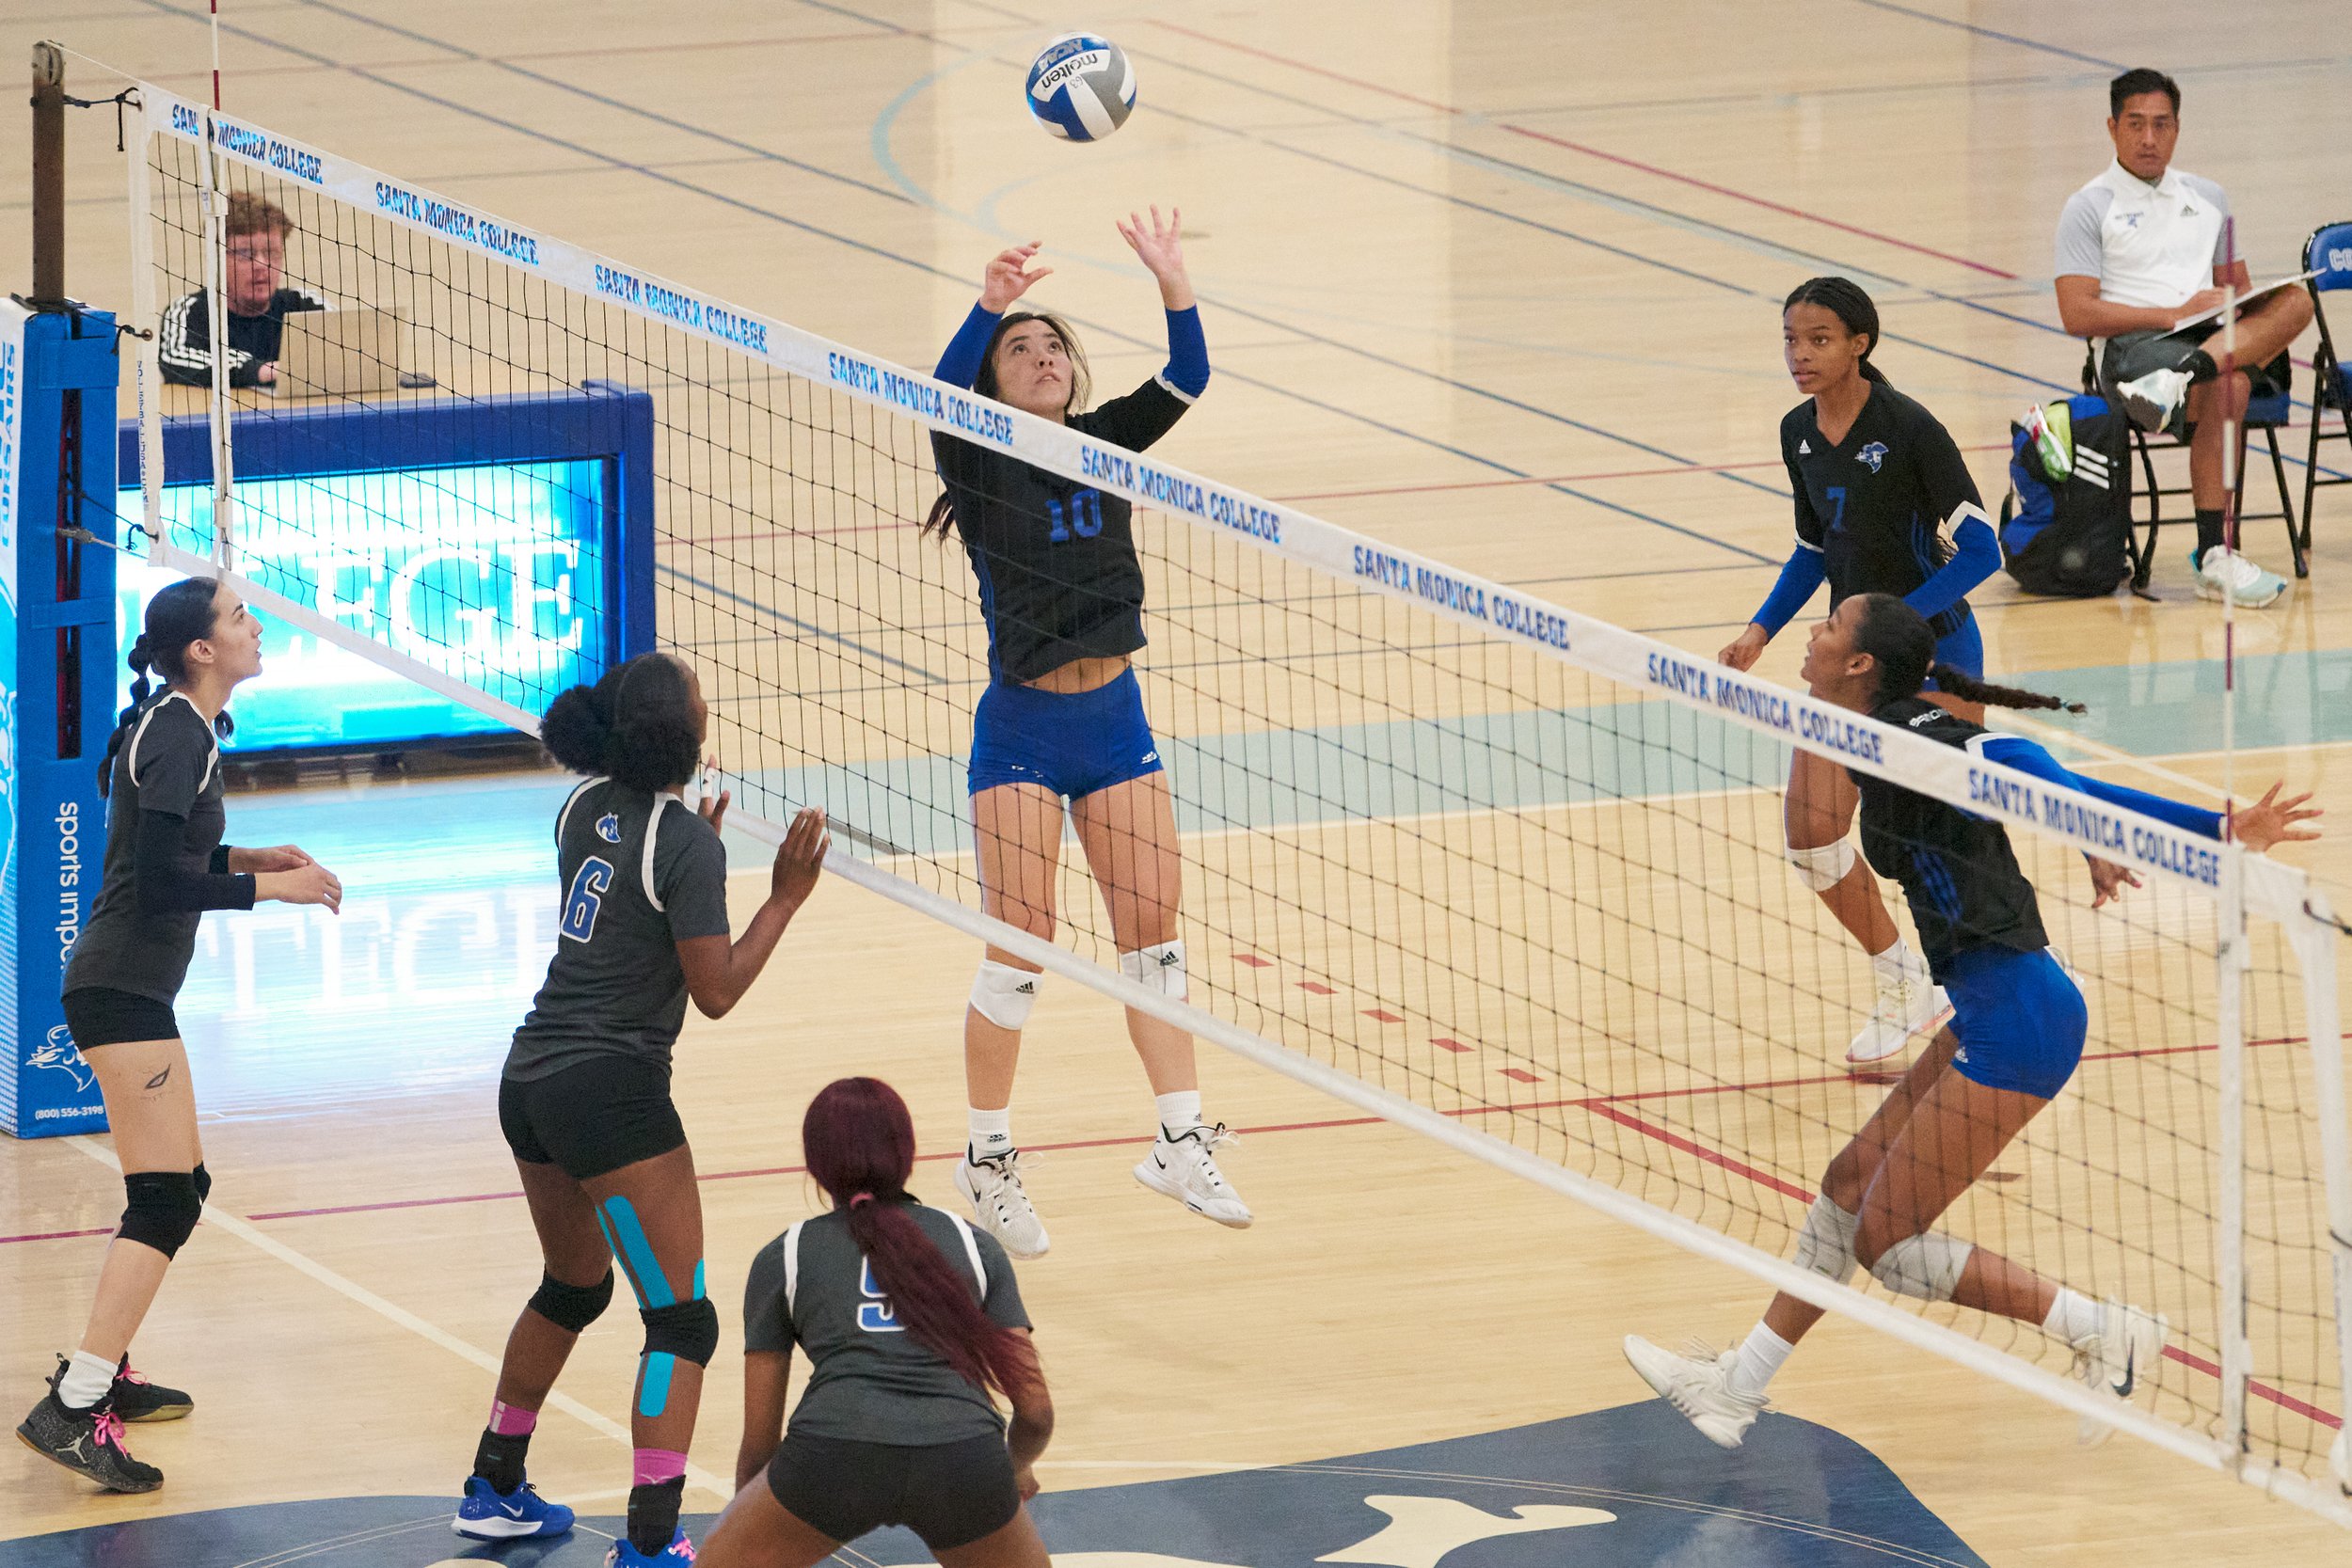  Santa Monica College Corsairs' Sophia Odle (center) sets the ball for Rain Martinez (bottom right) during the women's volleyball game against the West Los Angeles College Wildcats on Wednesday, Oct. 26, 2022, at SMC Gym in Santa Monica, Calif. The C